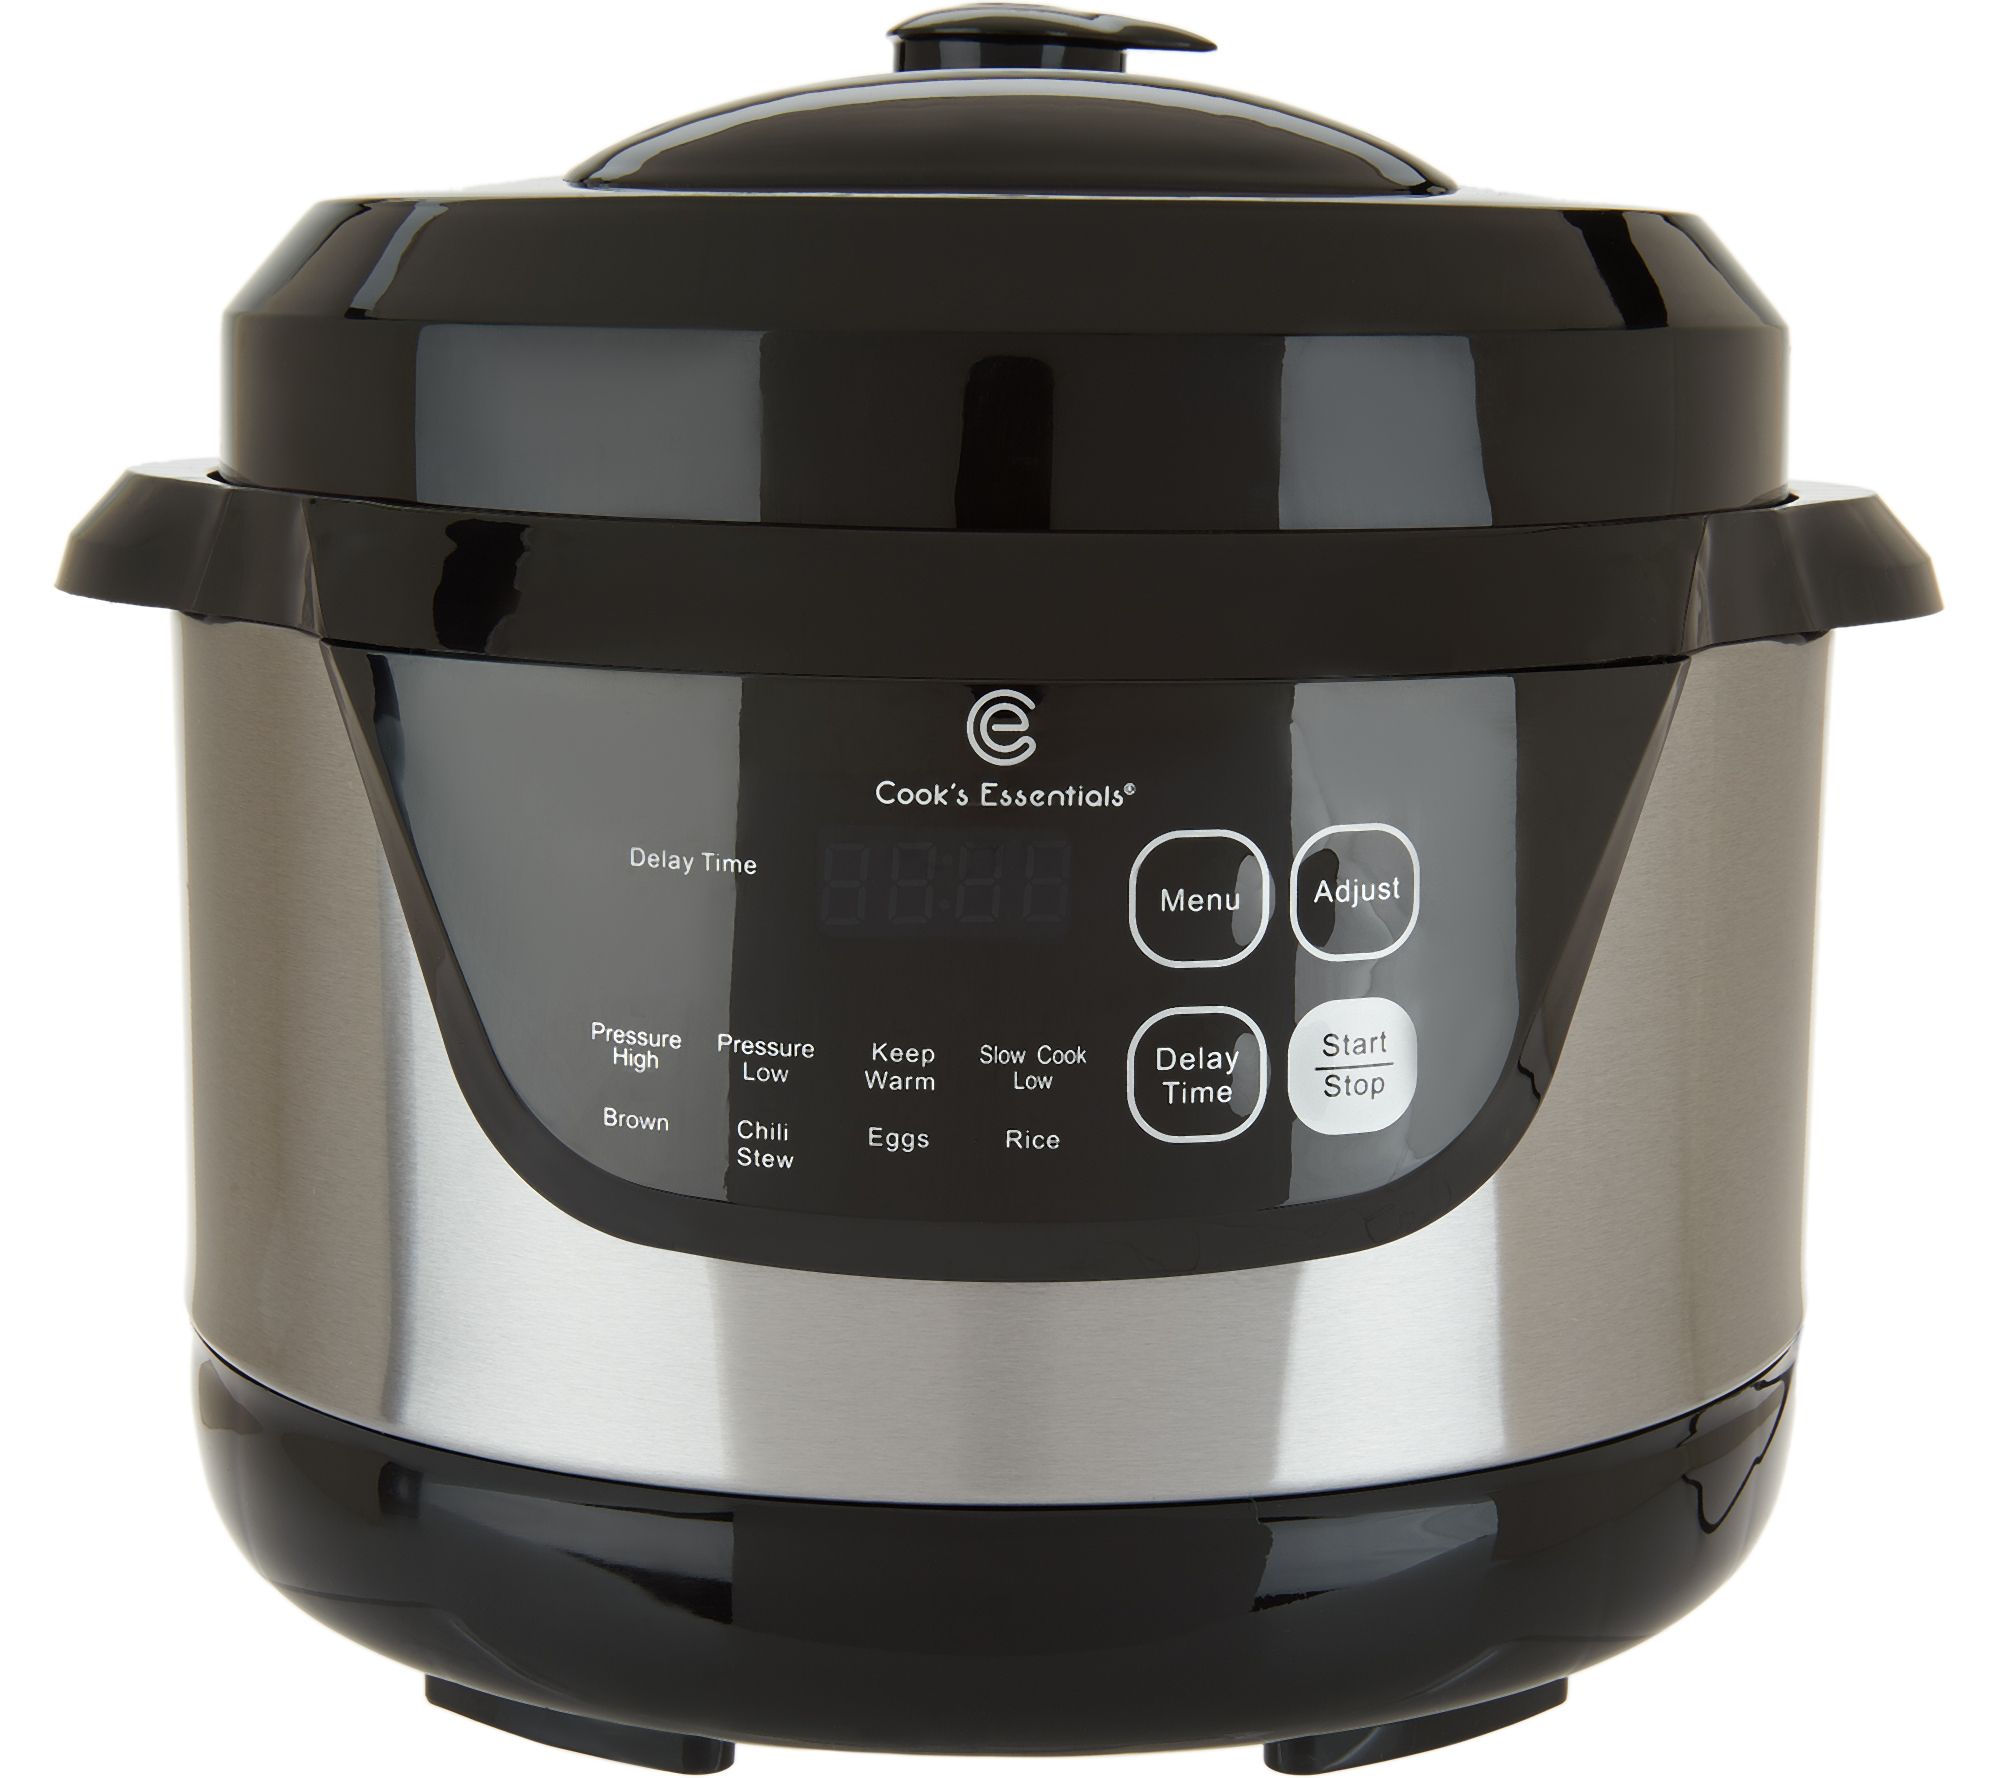 Outlet Express - Back in stock! Cooks Essentials 2 Qt Digital